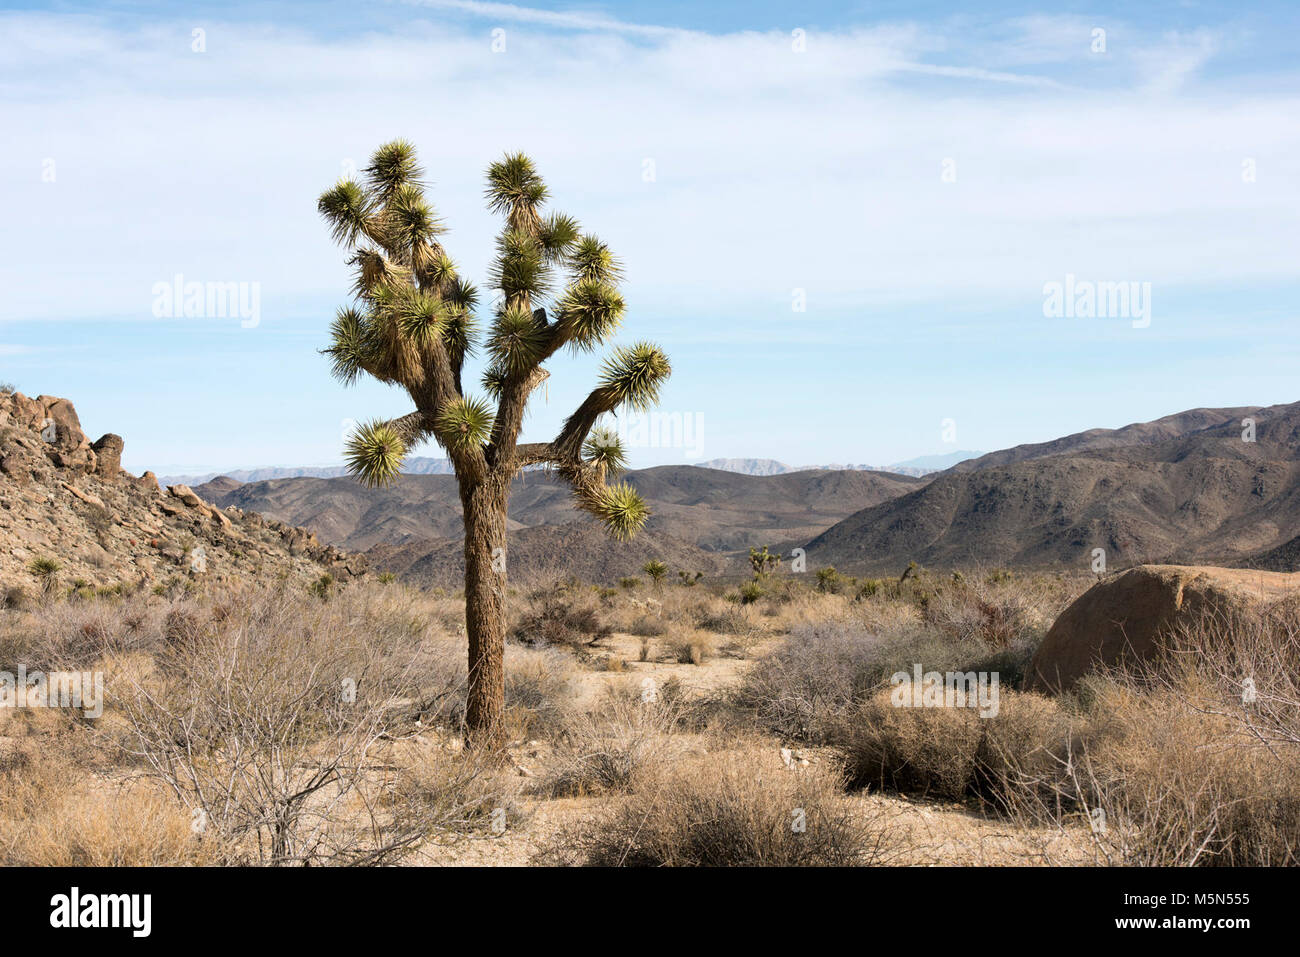 Joshua tree (Yucca brevifolia) growing in Lost Horse Valley . Stock Photo